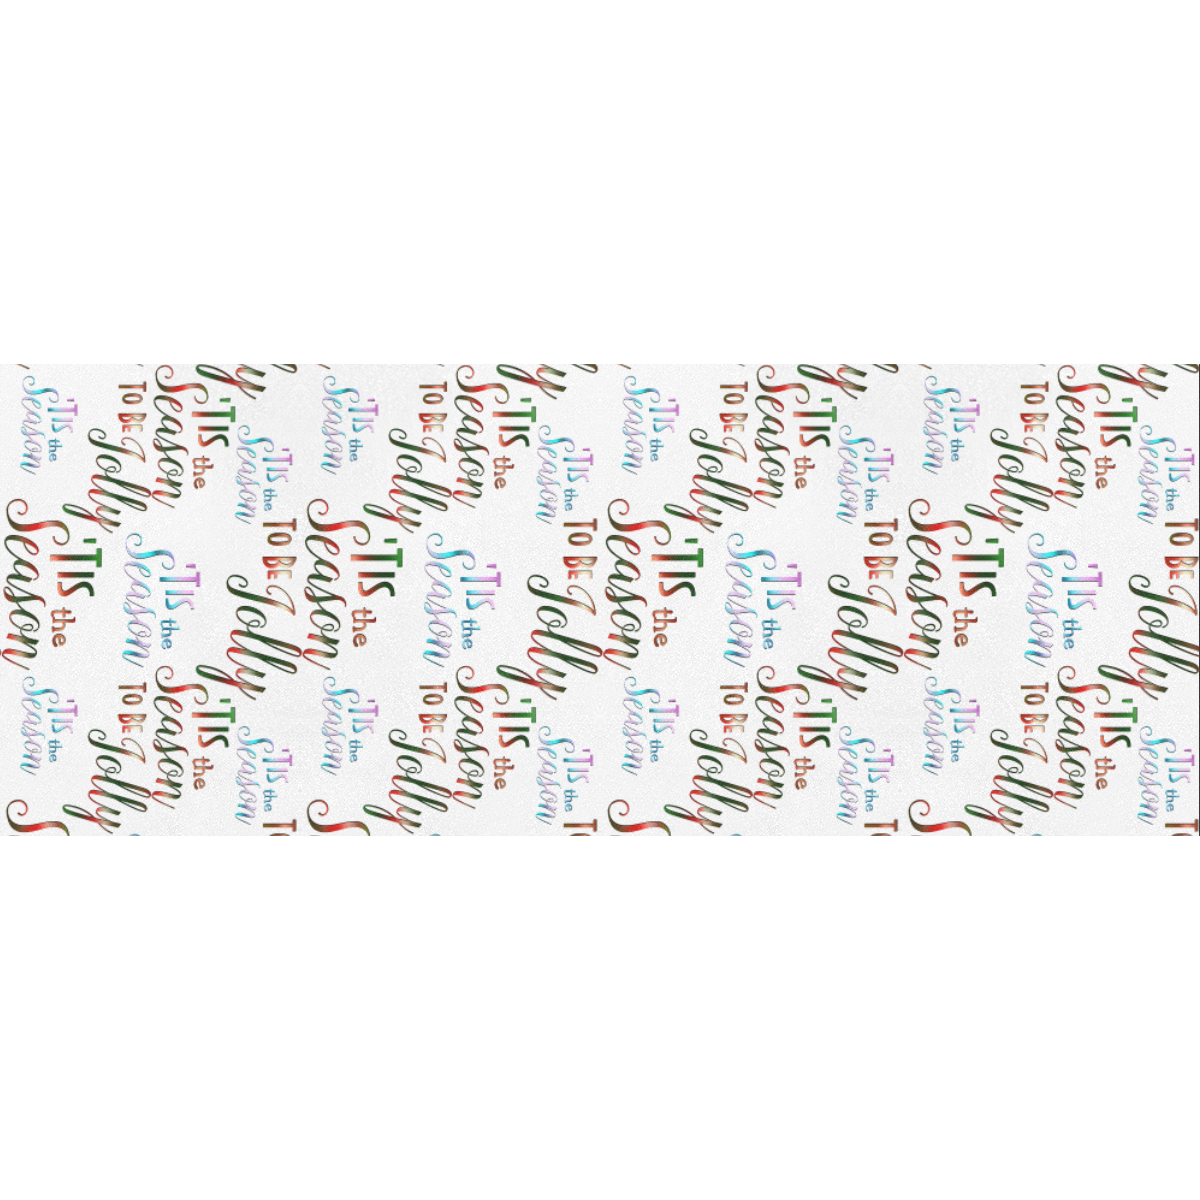 Christmas 'Tis The Season Pattern on White Gift Wrapping Paper 58"x 23" (2 Rolls)